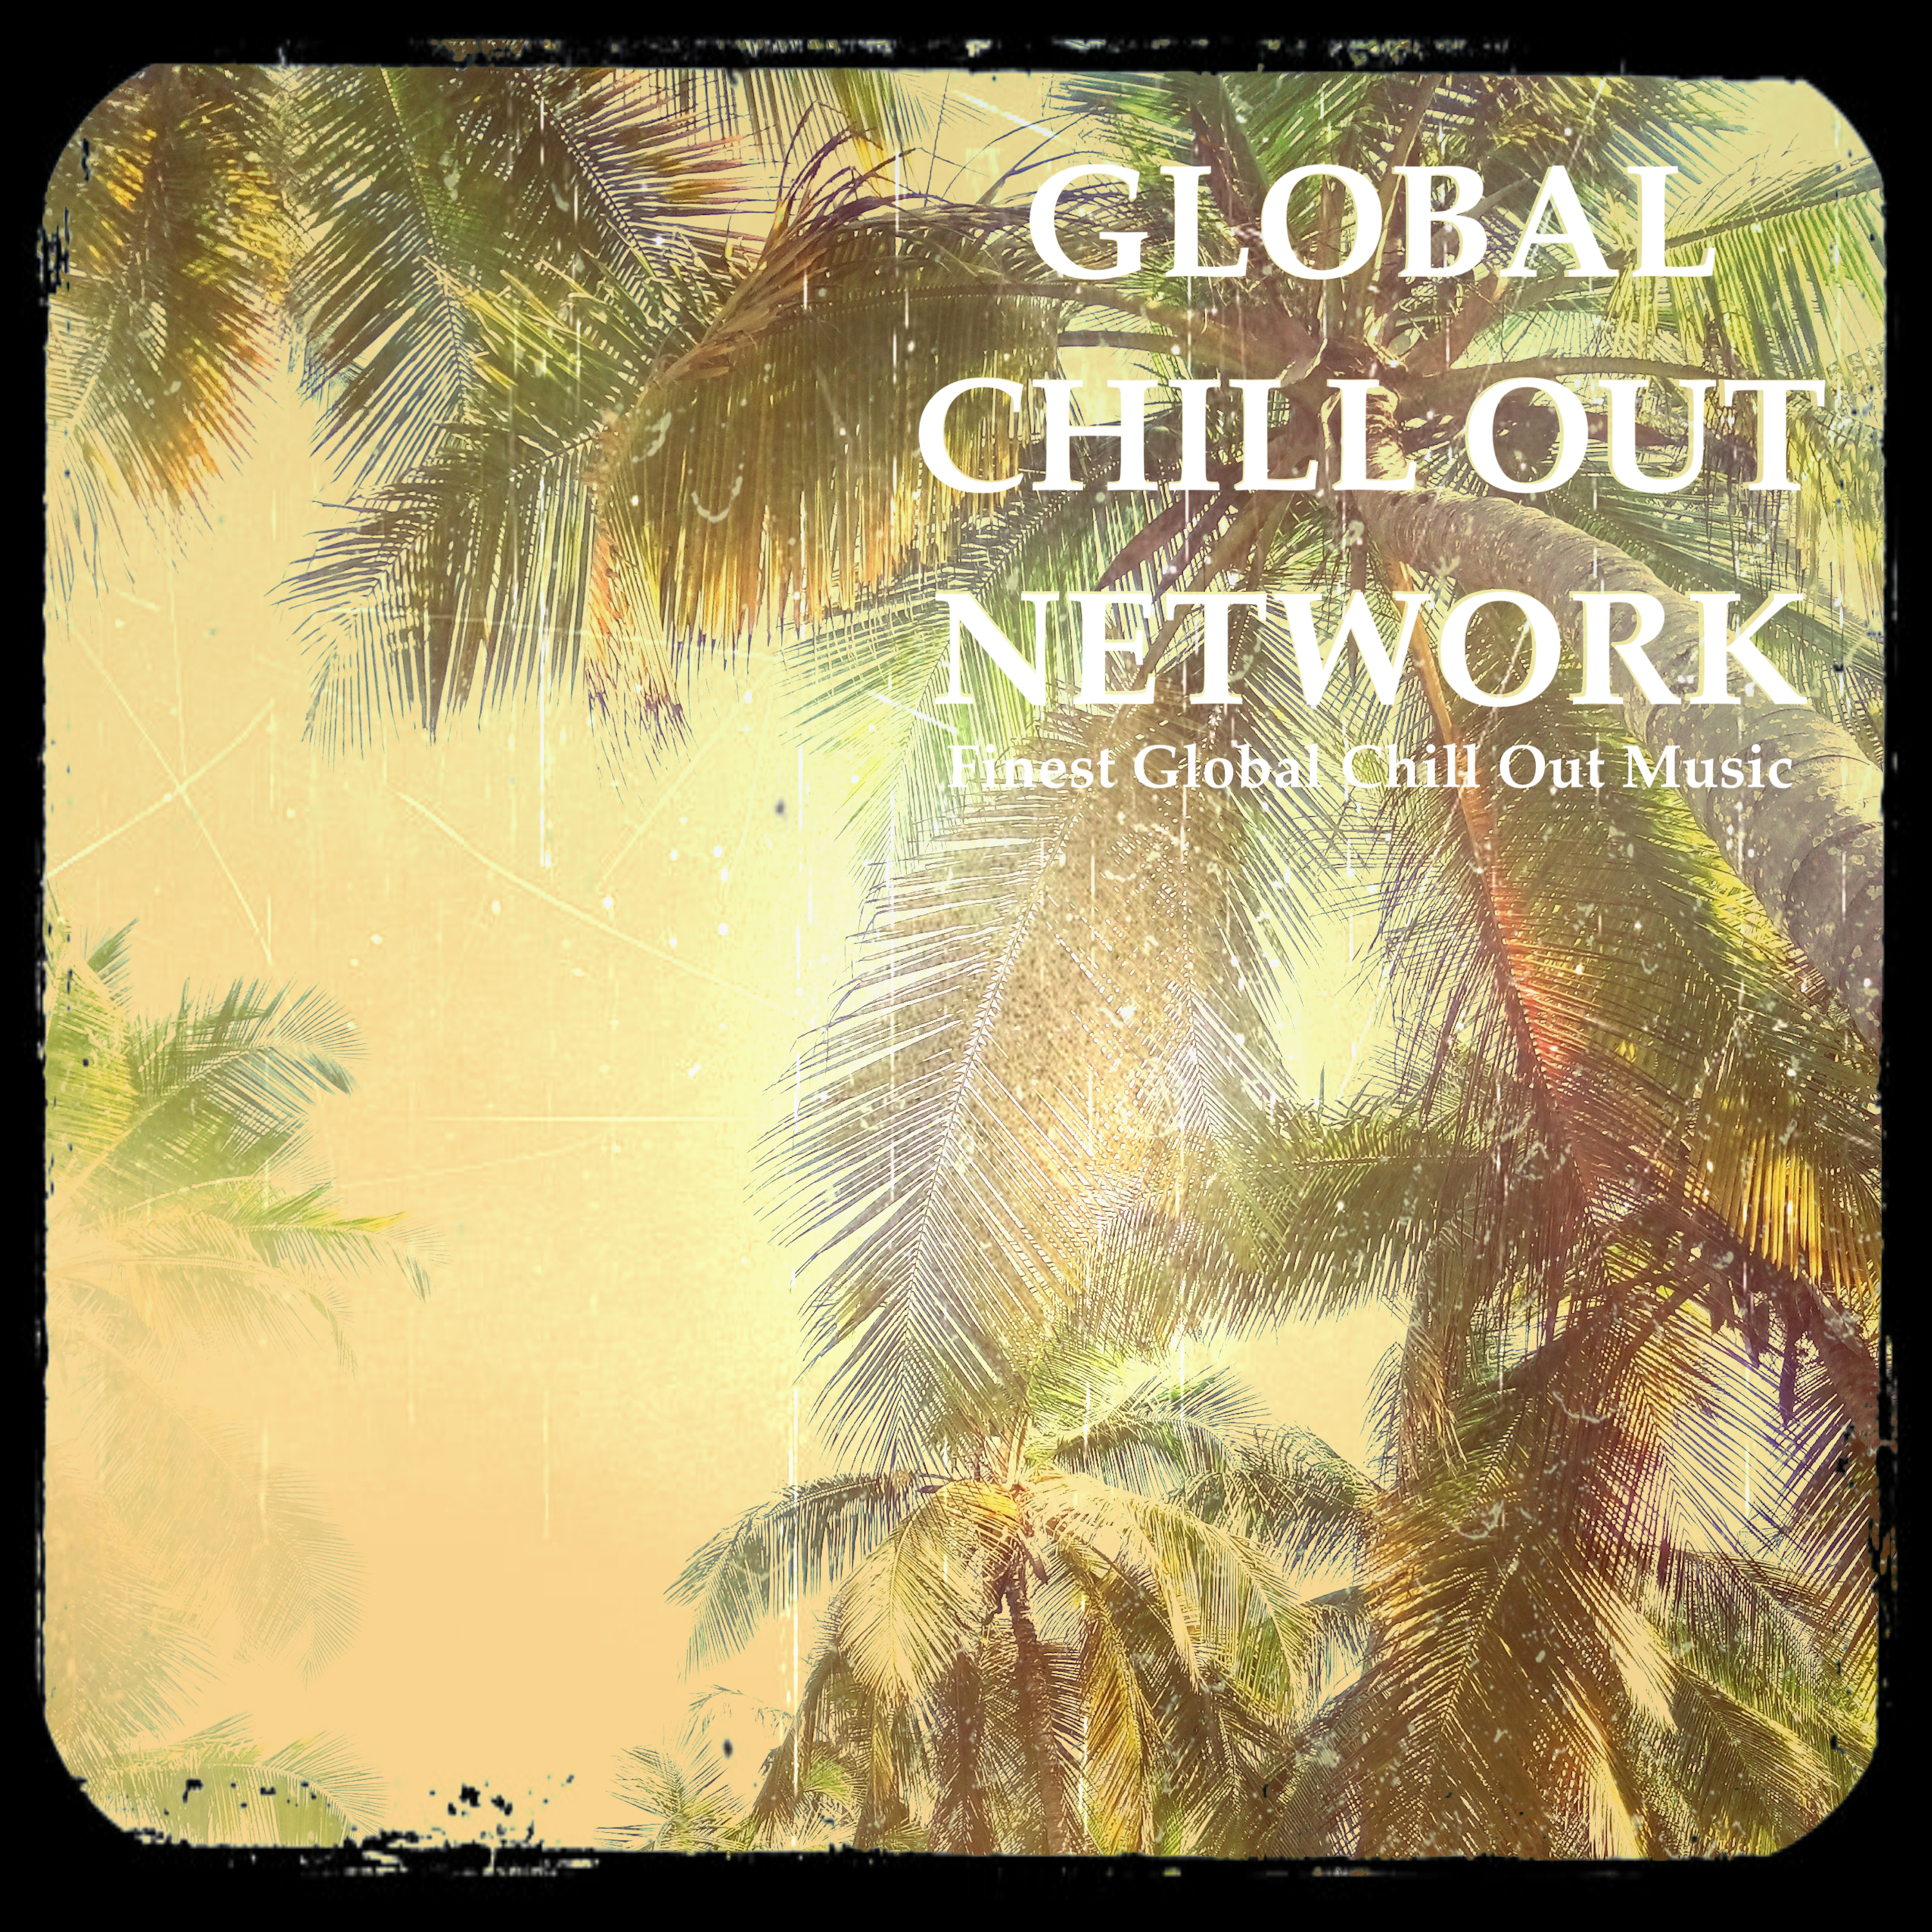 Global Chillout Network